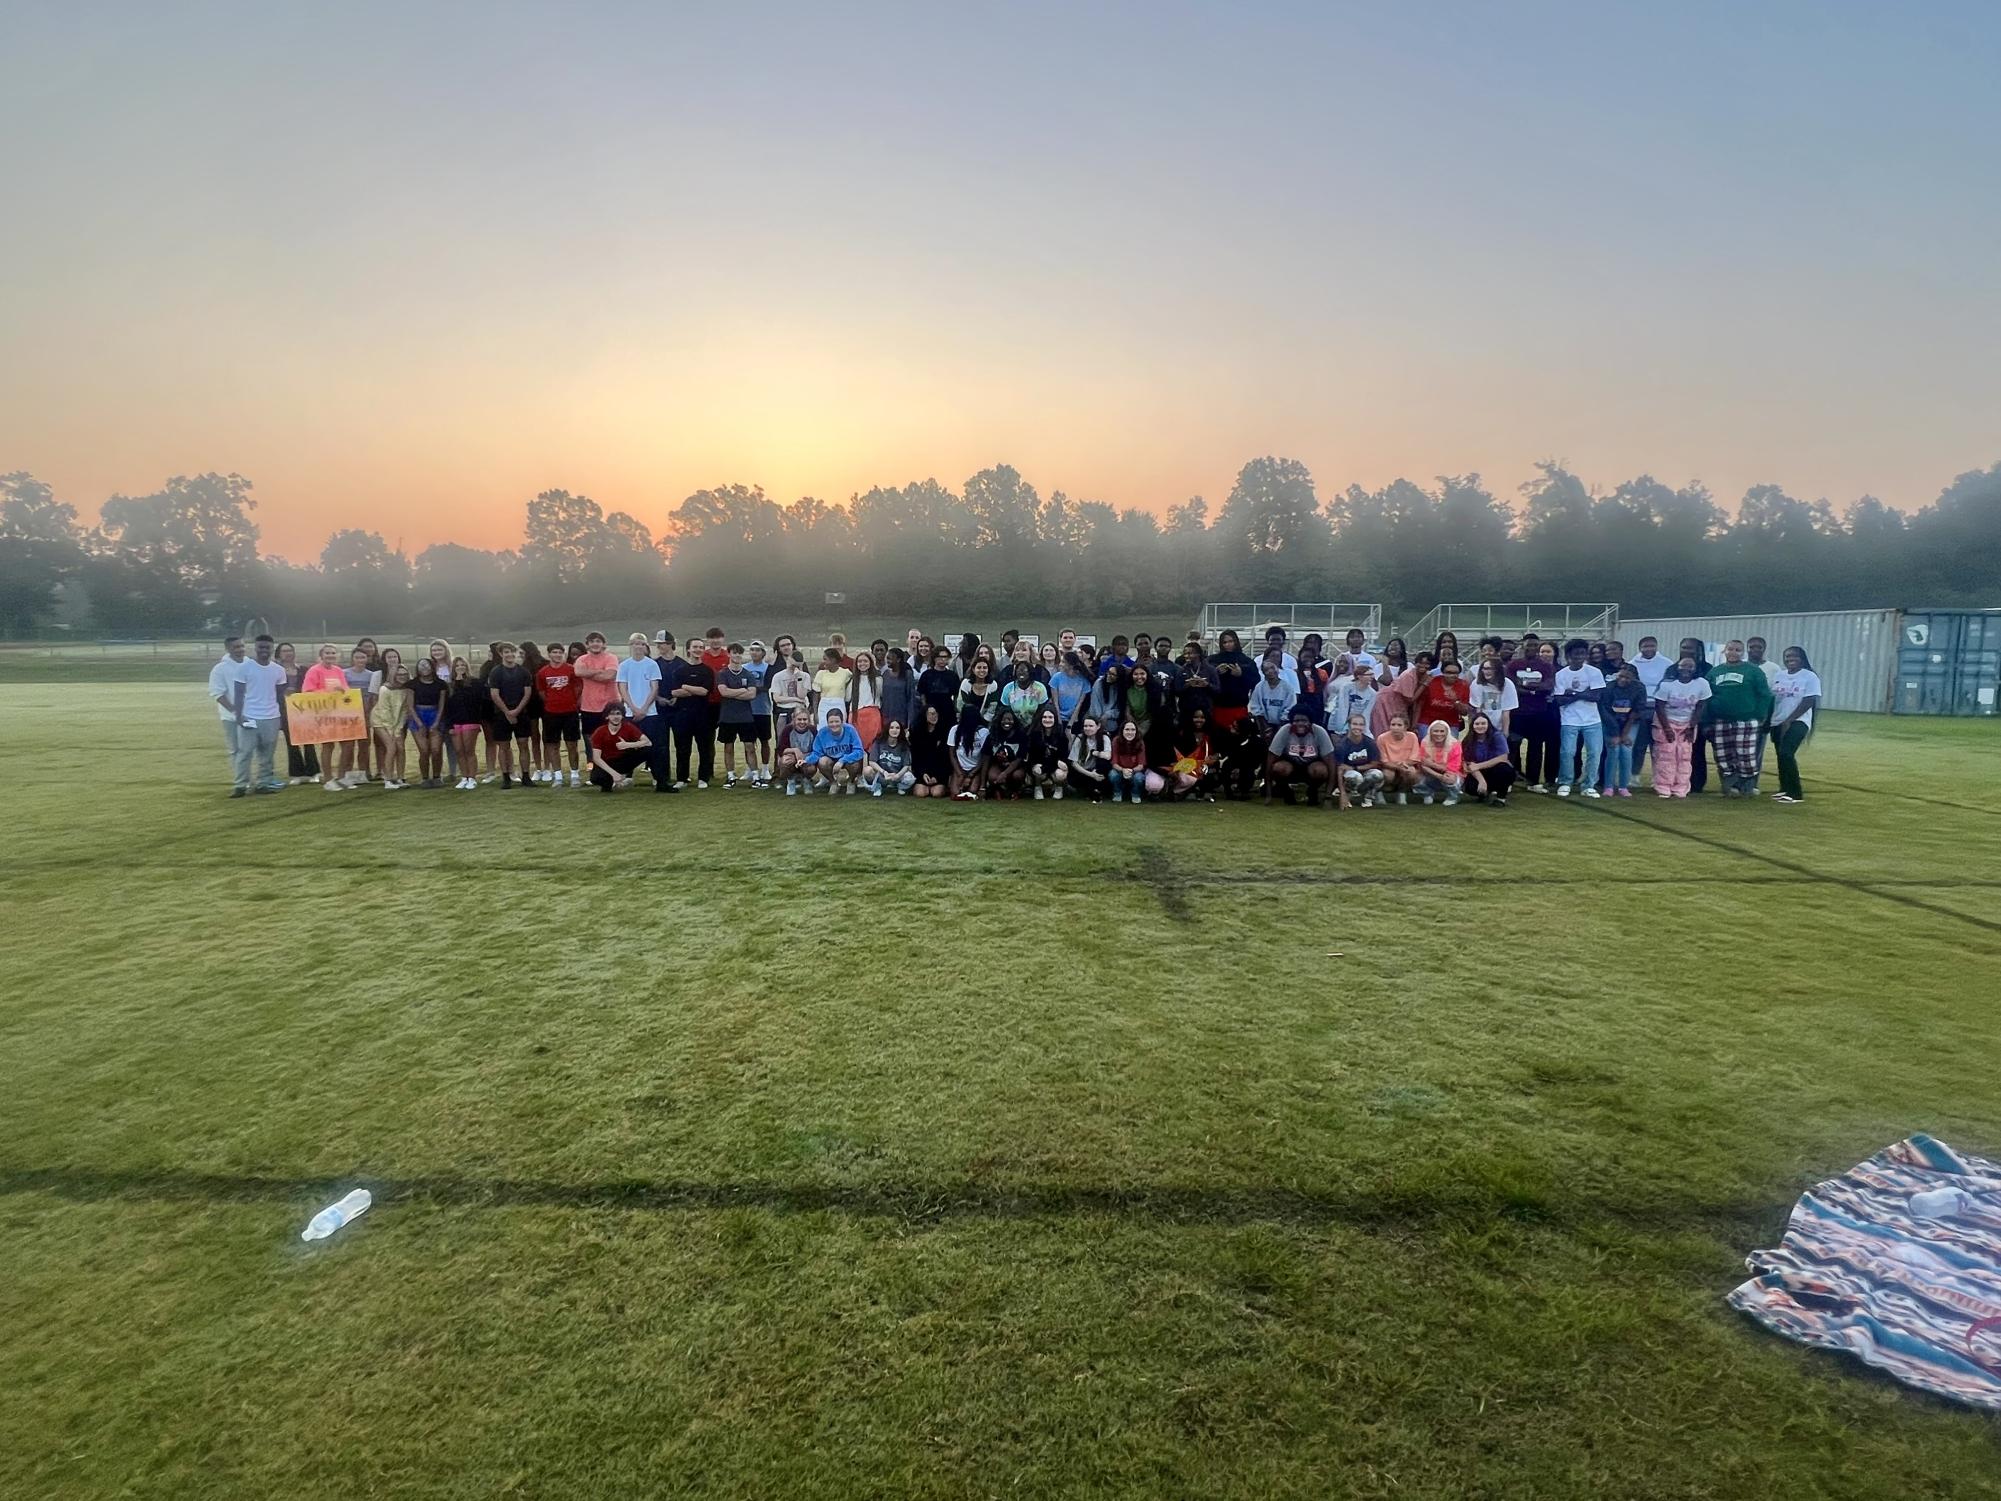 On+Friday%2C+Center+Hill+High+School%E2%80%99s+class+of+2024+gathered+around+the+football+practice+field+to+kick+off+their+first+senior+event+of+the+year.